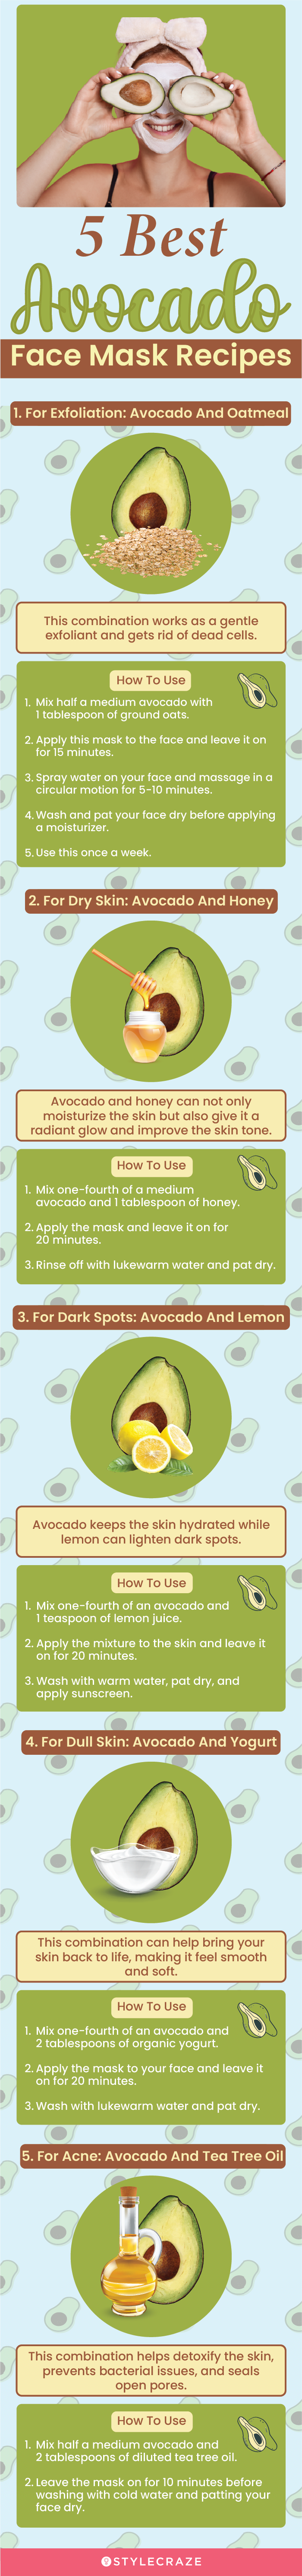 5 best avocado face mask recipes (infographic)